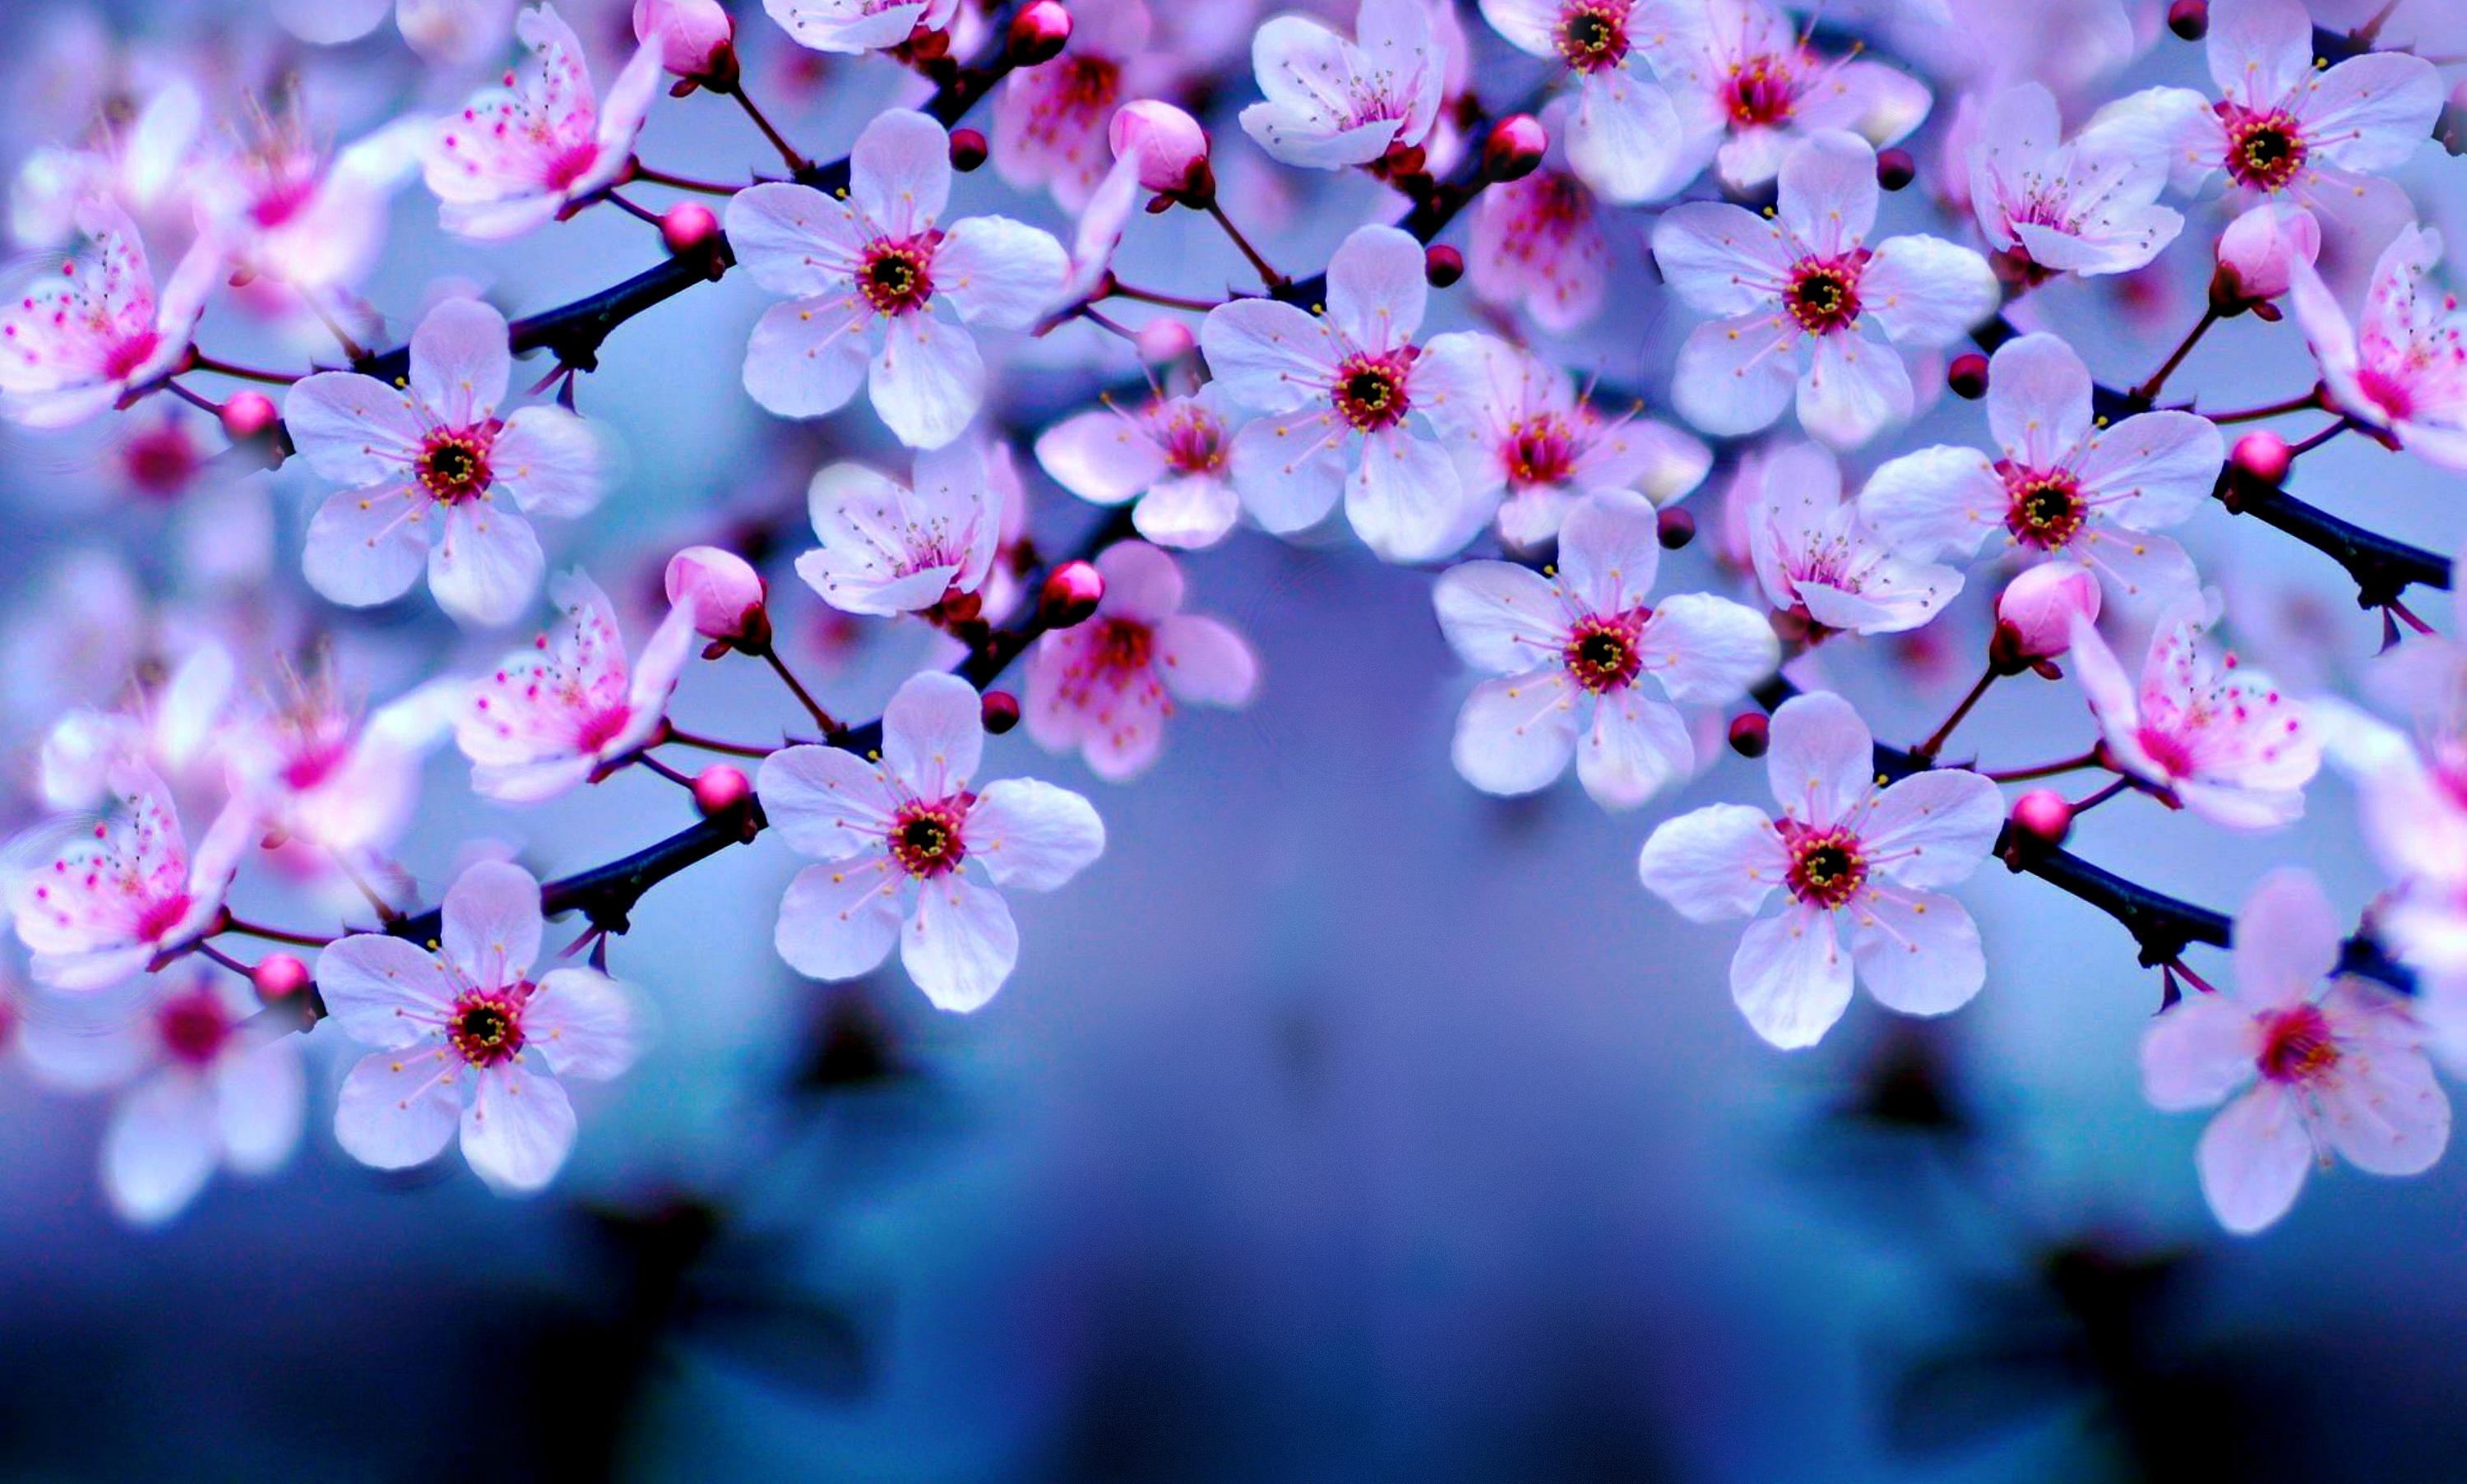 Enjoy the collection of beautiful wallpaper cherry blossoms